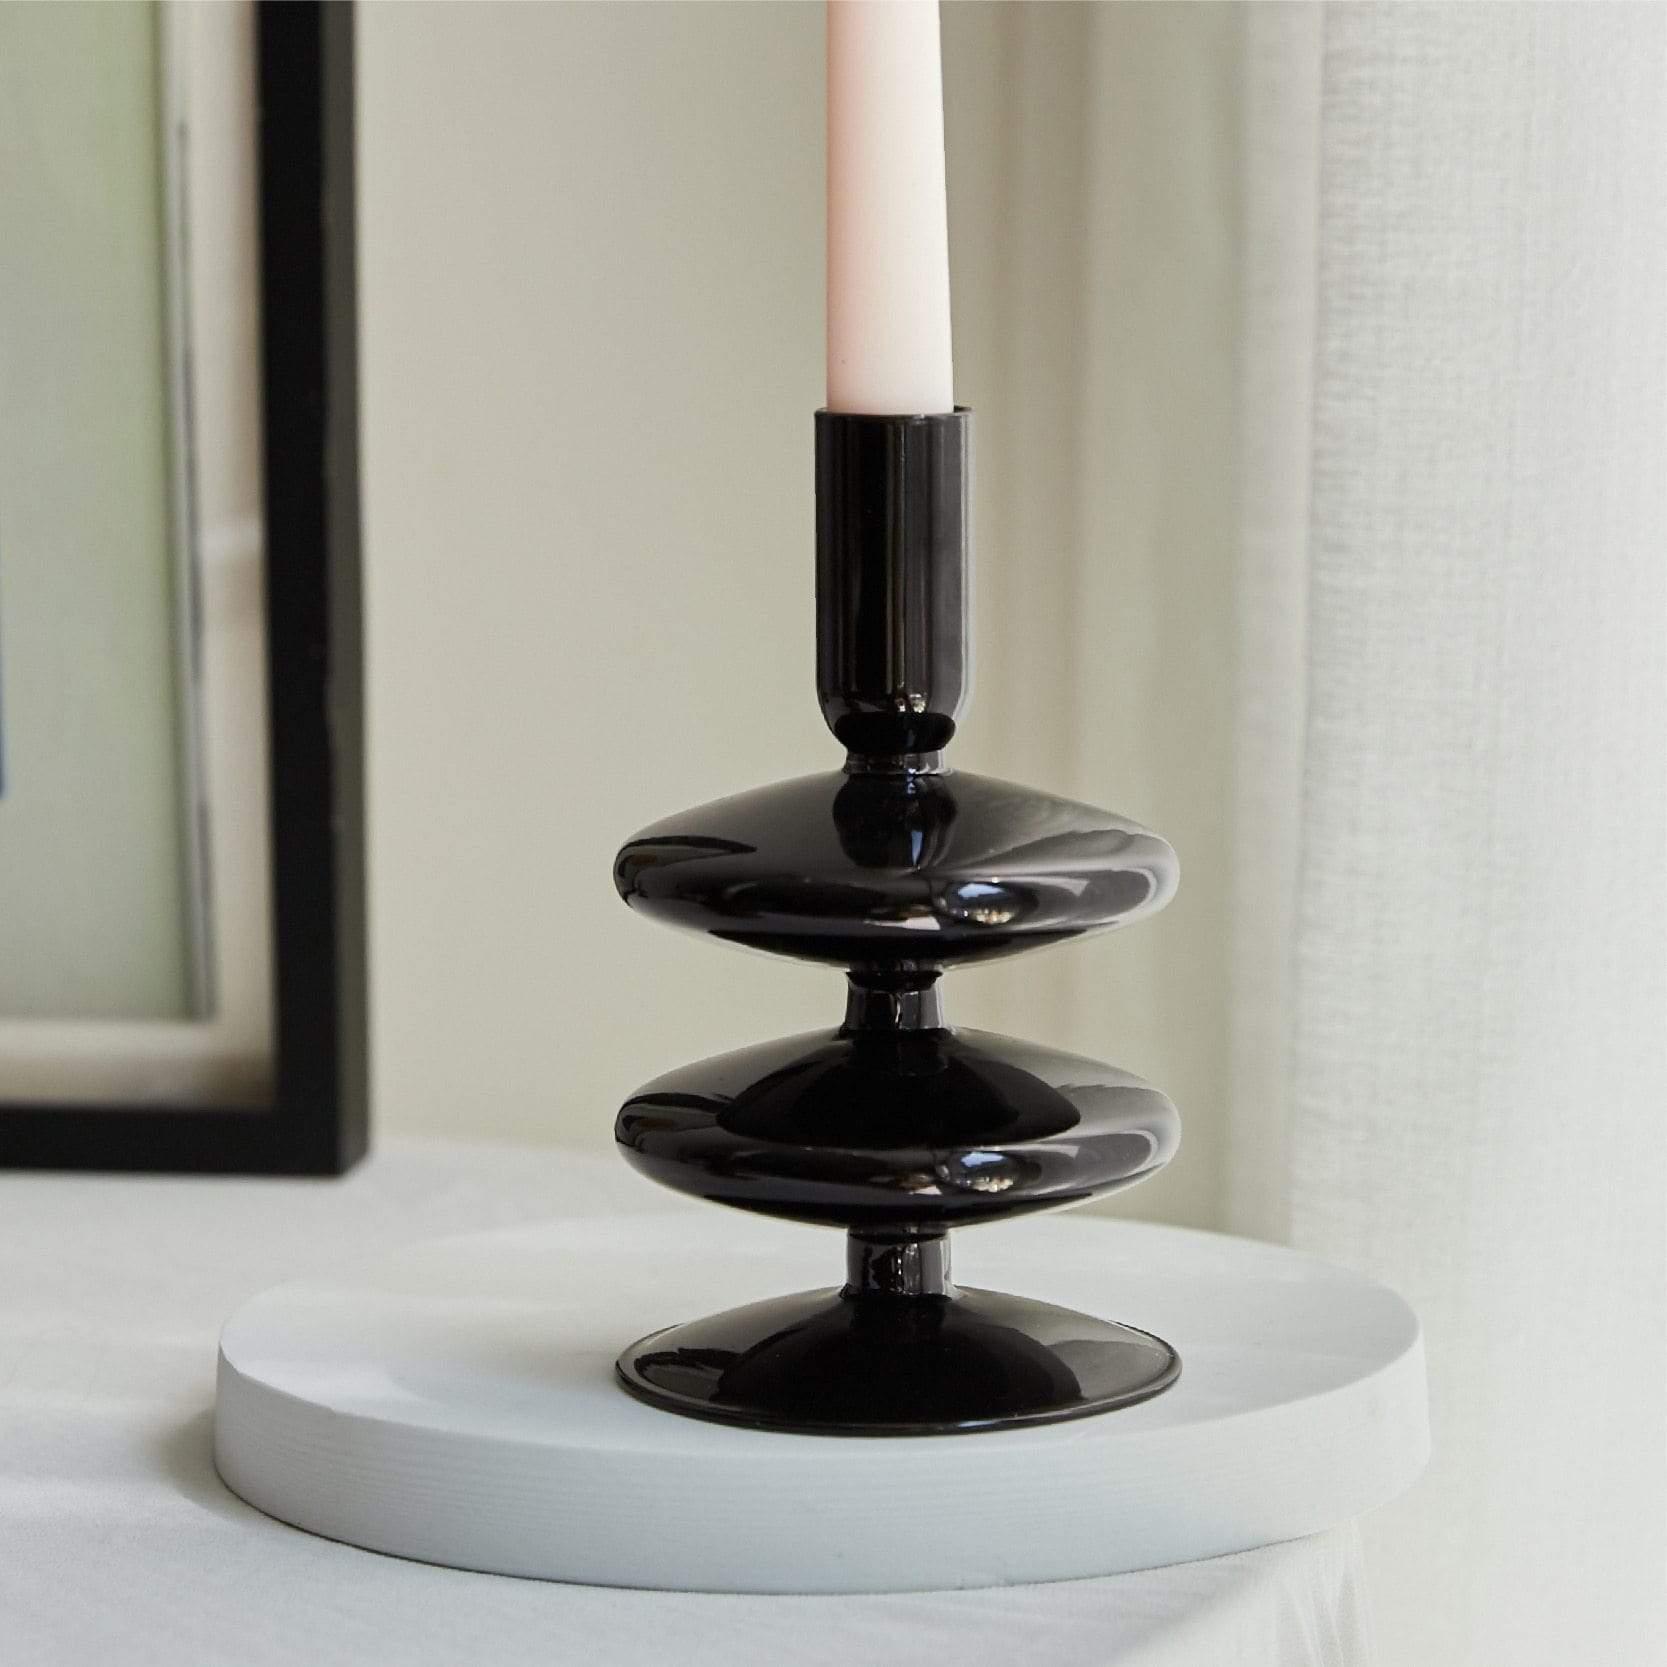 Shop 0 2tier sharp Abaco Candle Holder Mademoiselle Home Decor